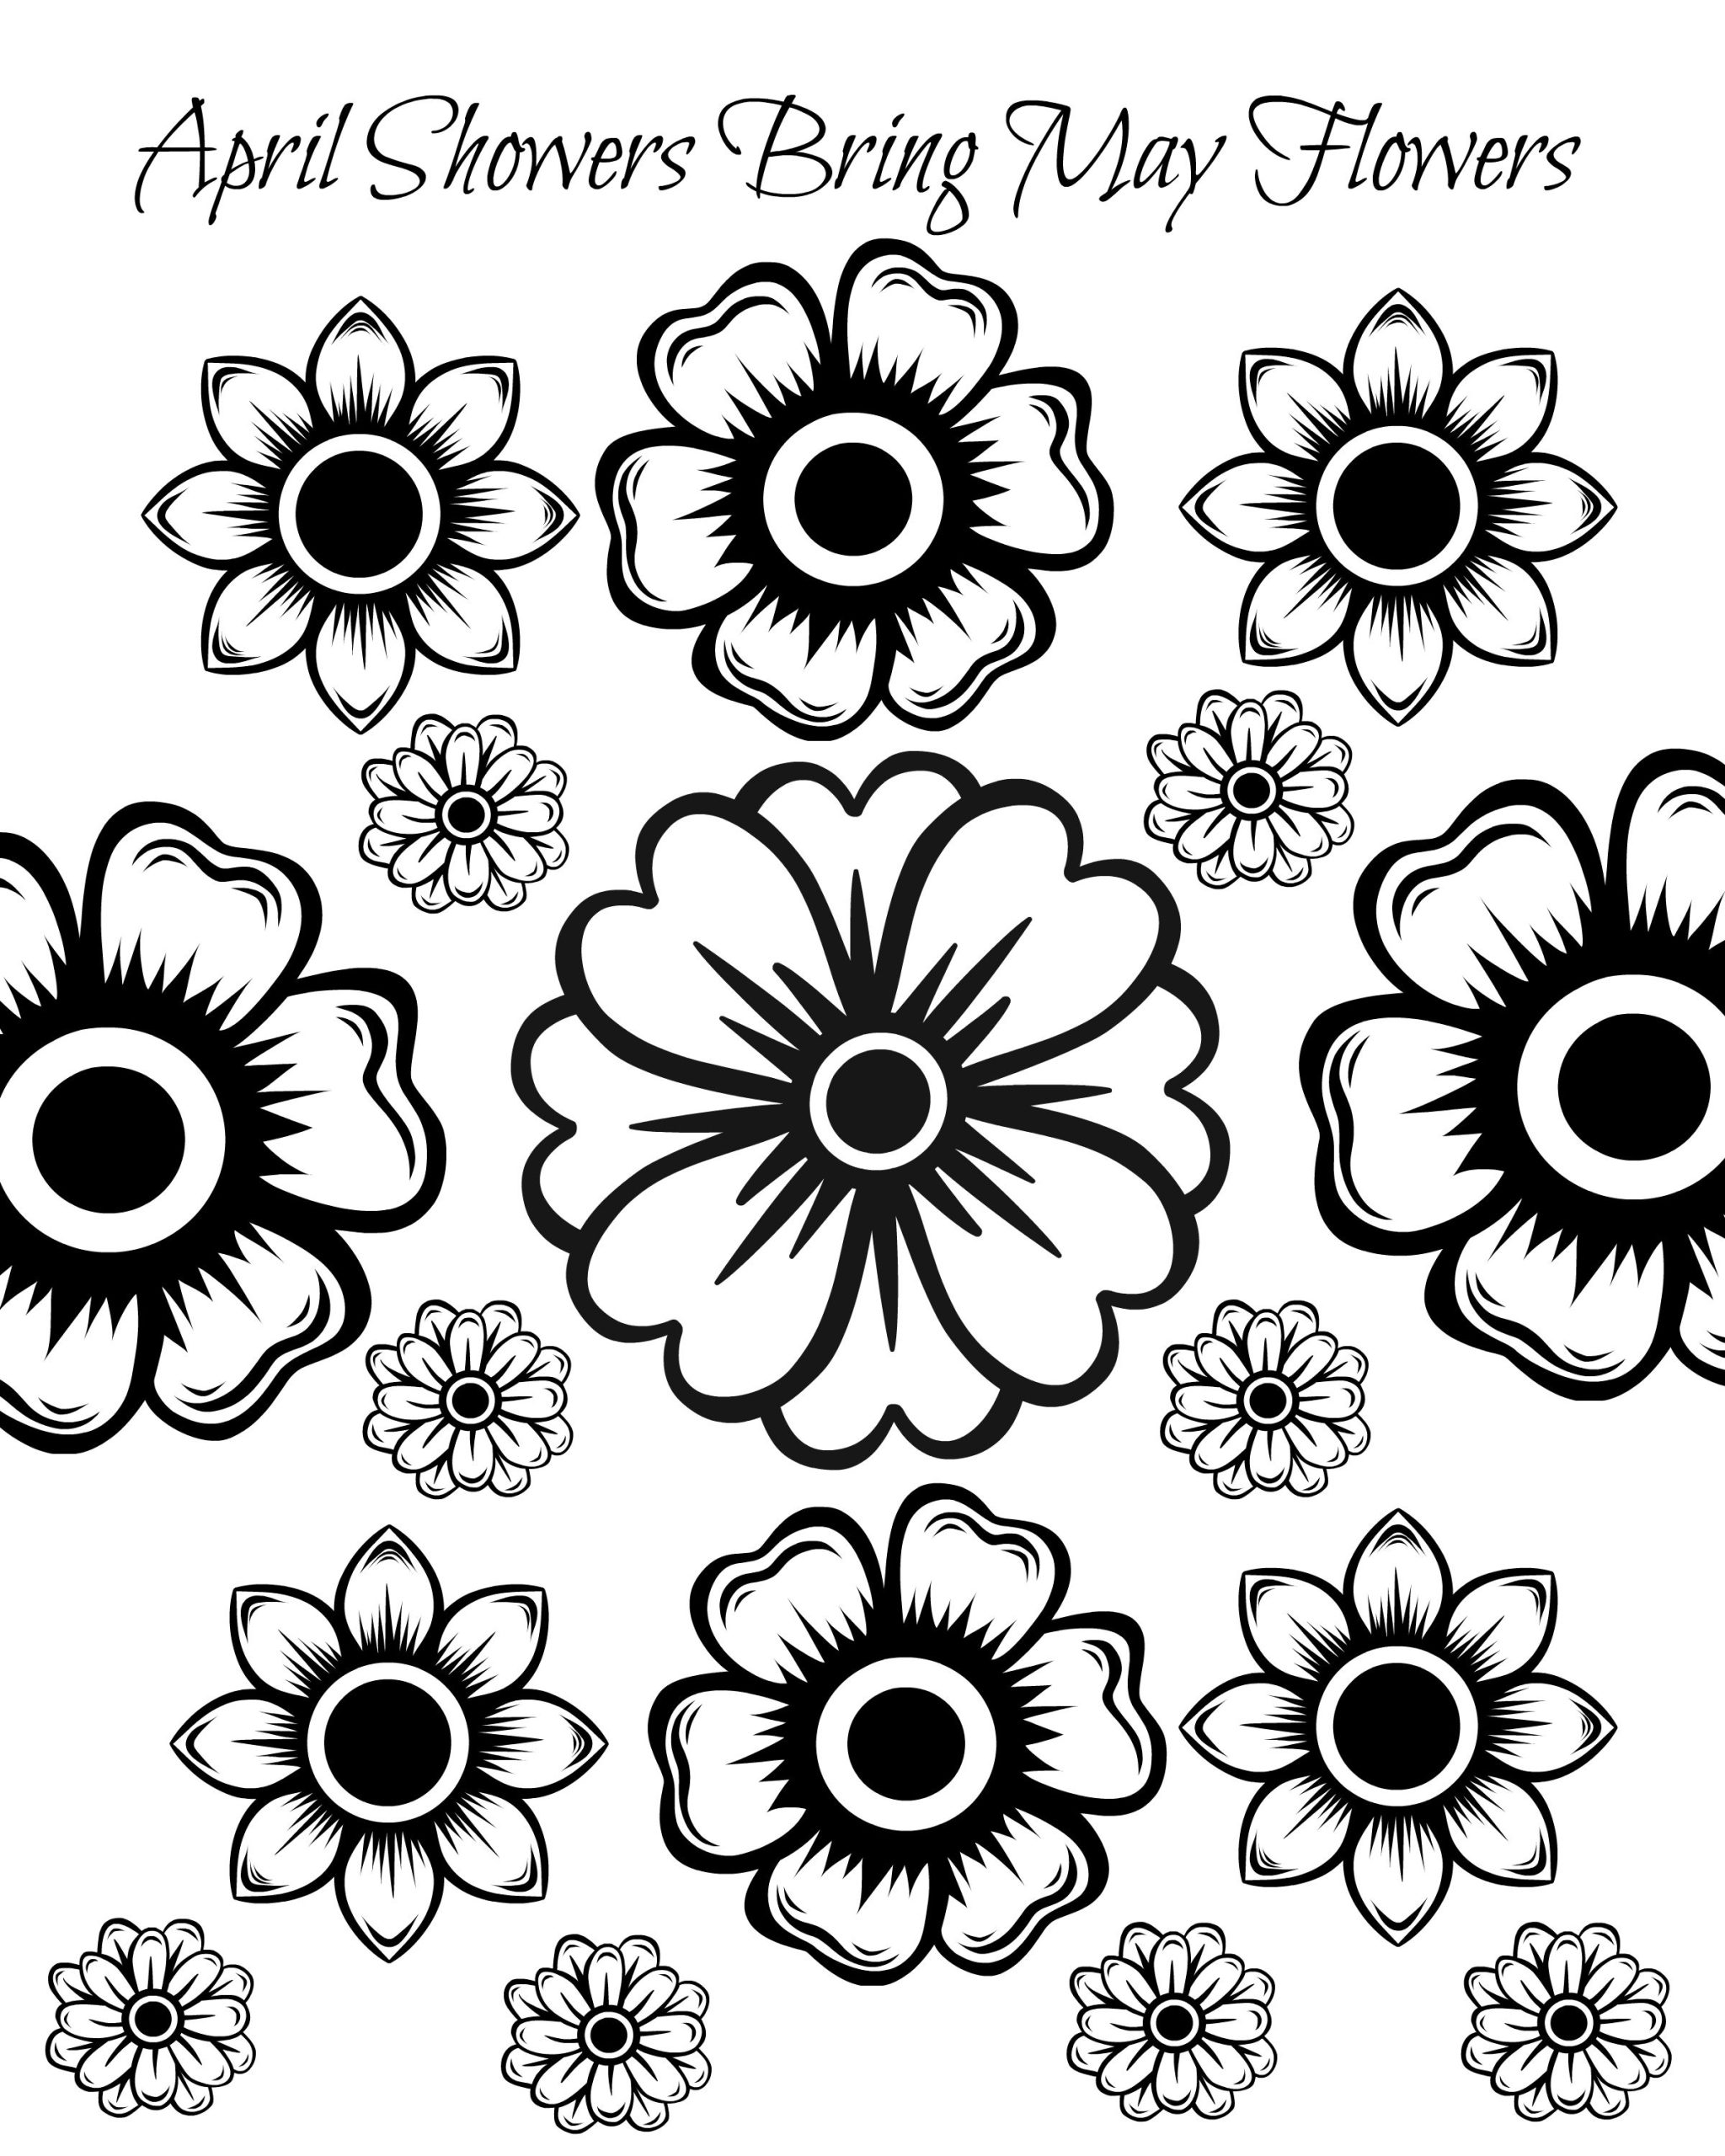 Flower Coloring Sheets